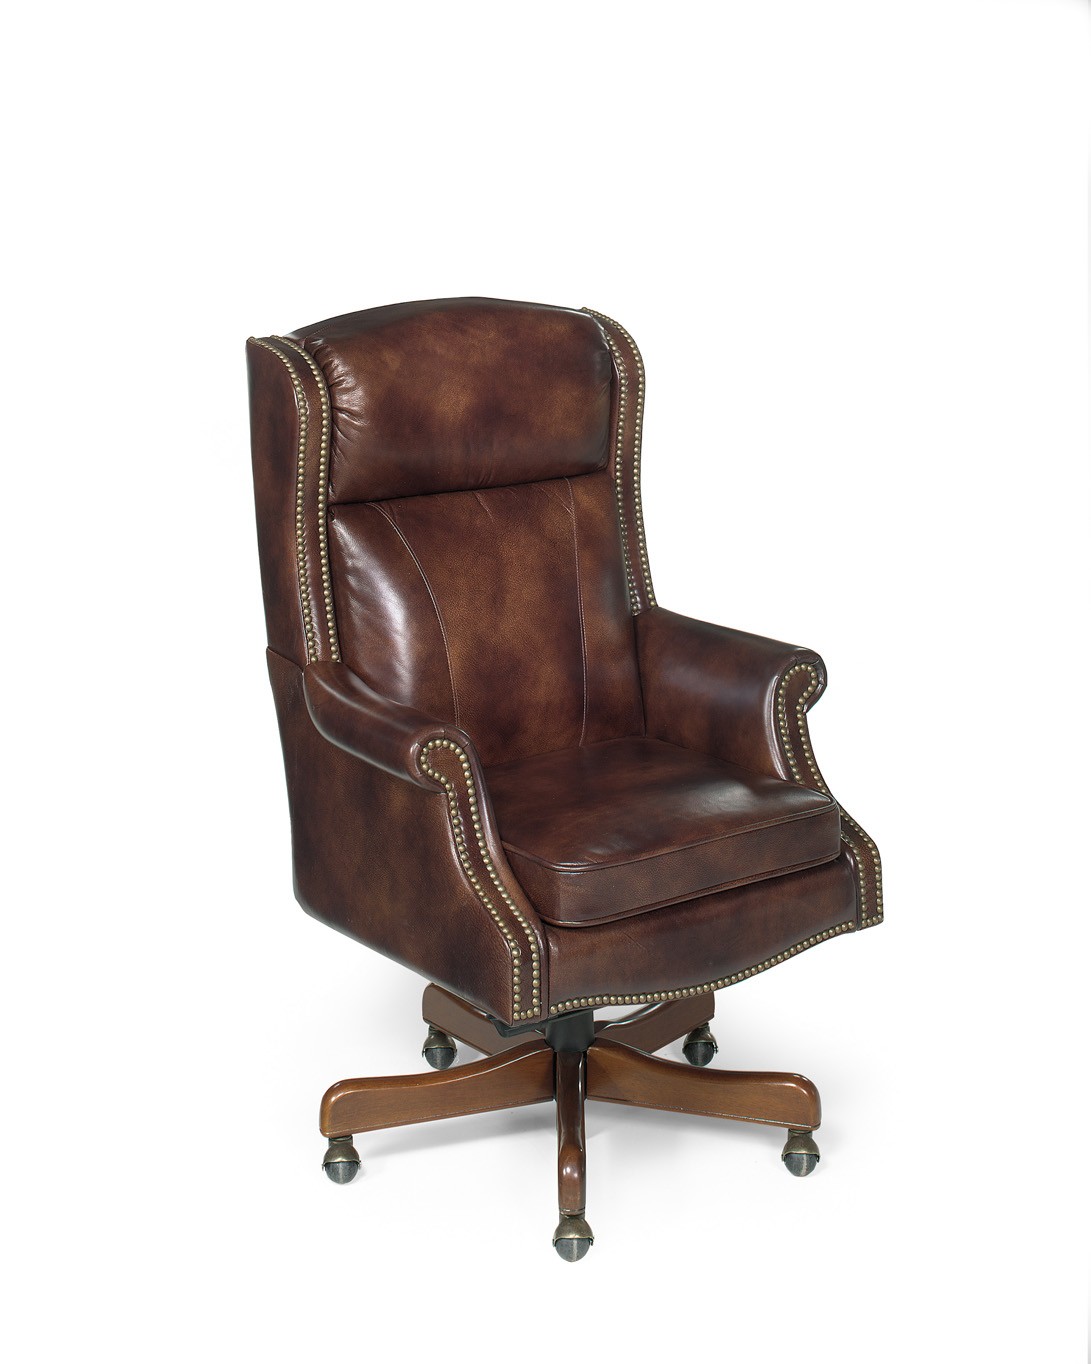 Hooker Furniture Seating EC216 Merlin Executive Swivel Leather Chair